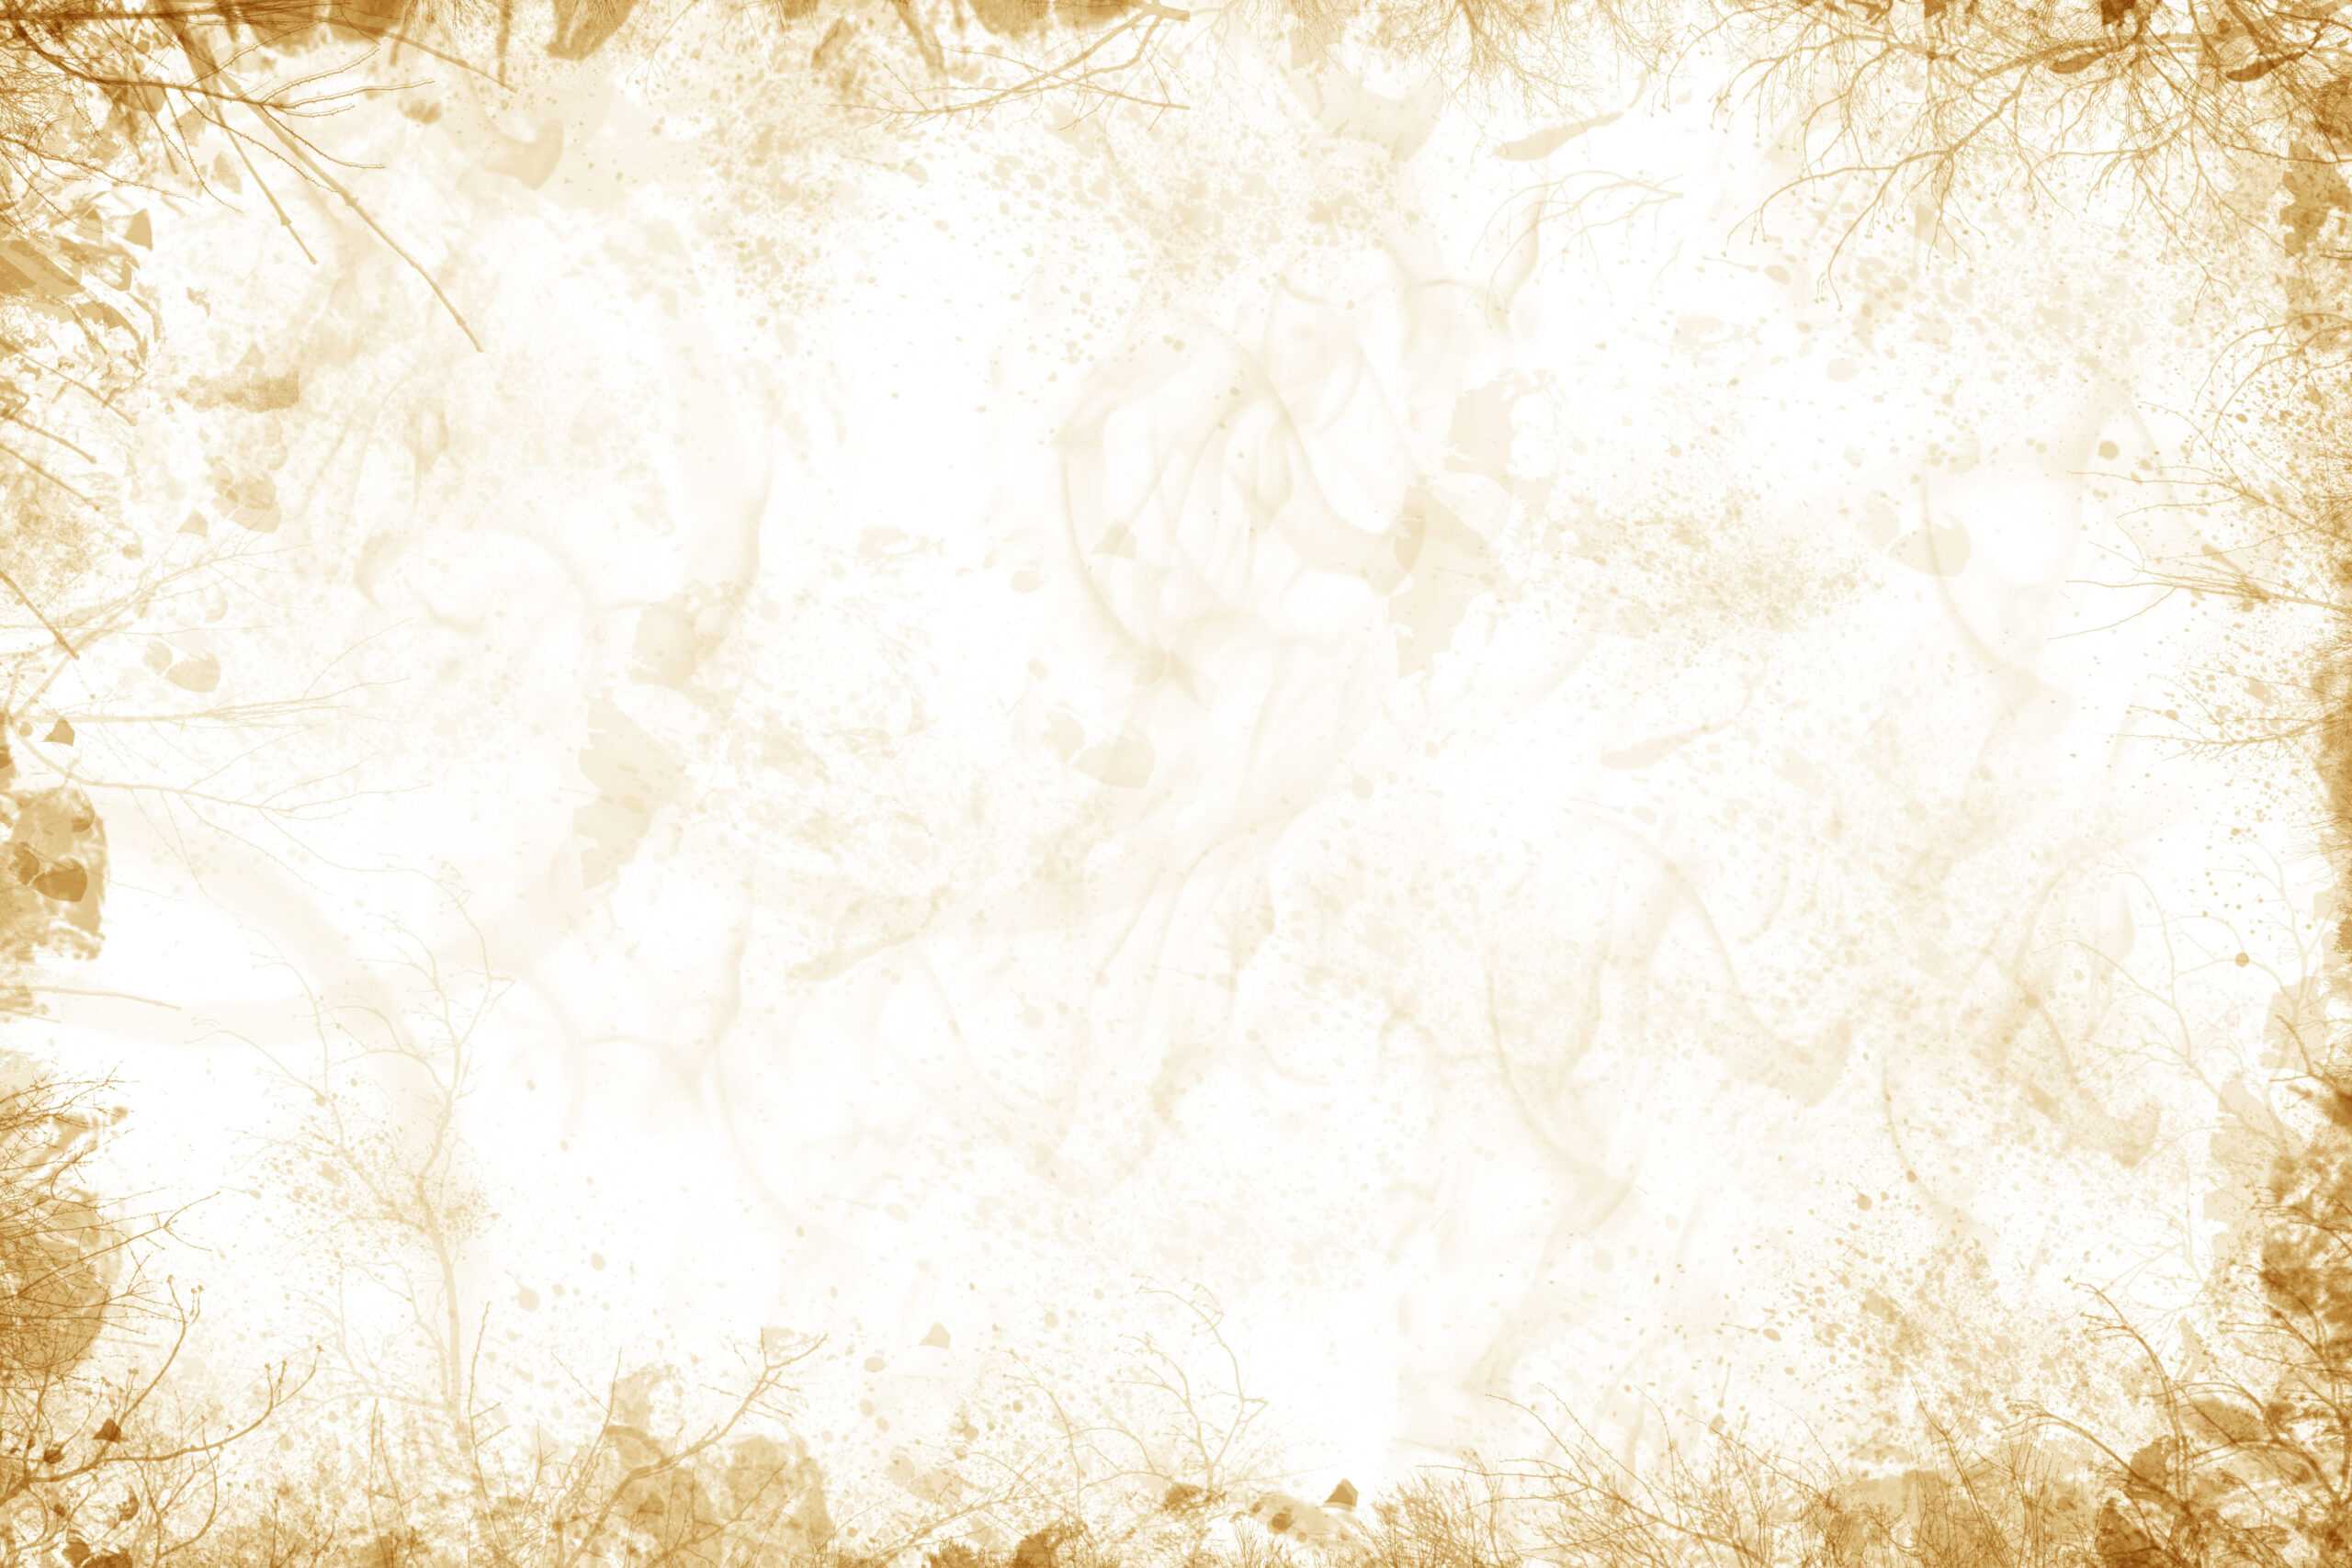 Light Beige Frames Free Ppt Backgrounds For Your Powerpoint Throughout Funeral Powerpoint Templates